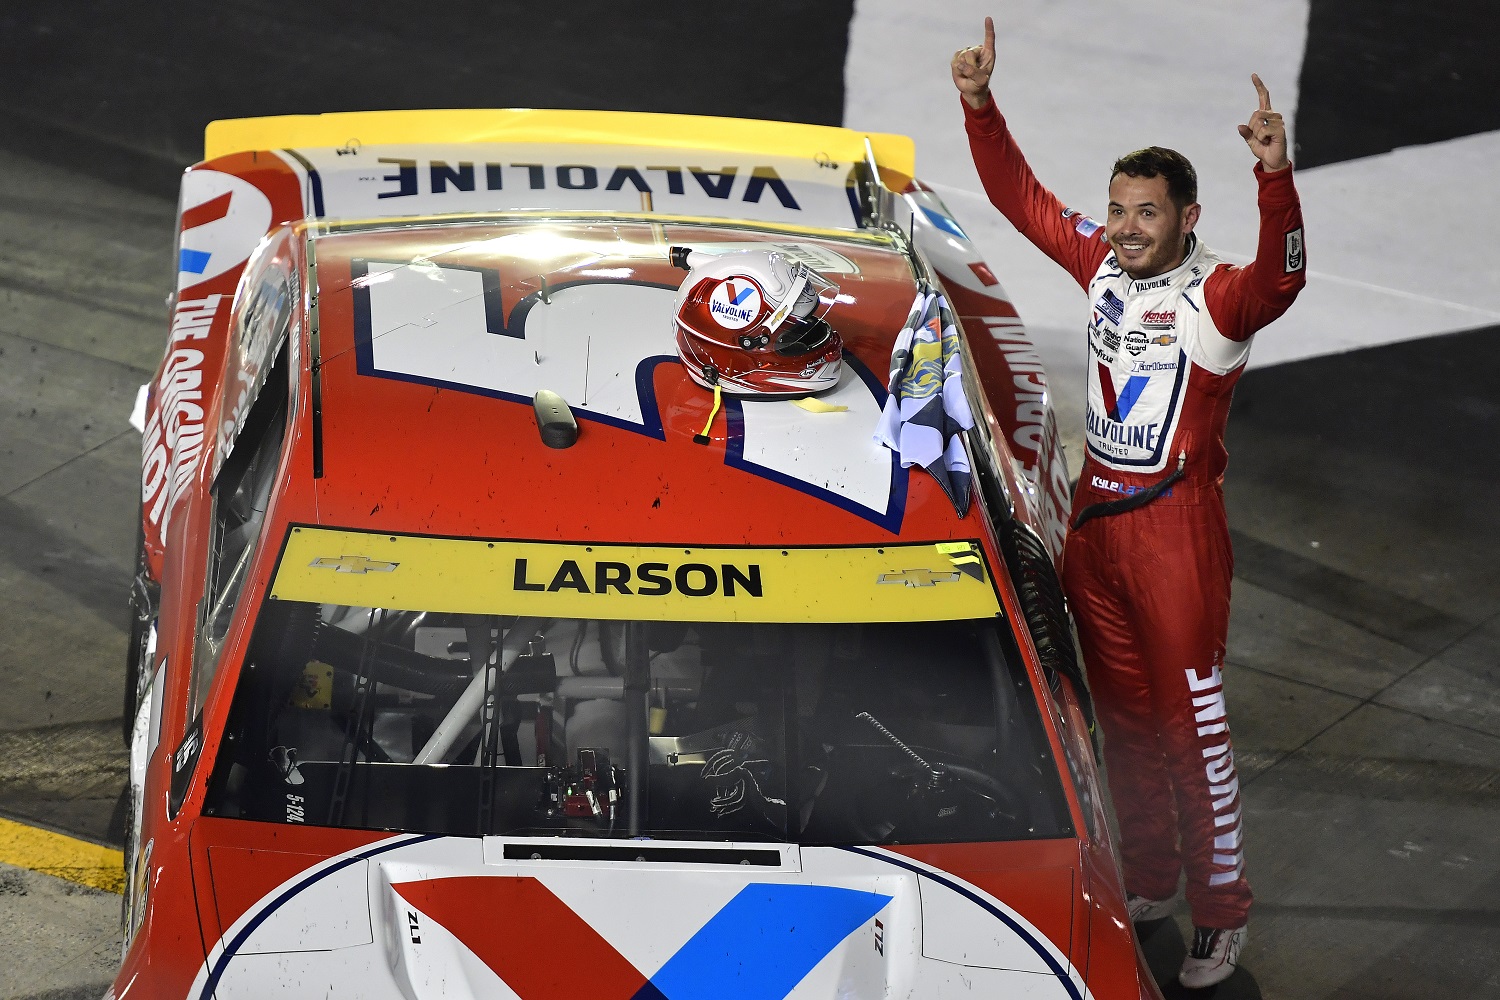 Kyle Larson, driver of the No. 5 Chevrolet, celebrates after winning the NASCAR Cup Series Bass Pro Shops Night Race at Bristol Motor Speedway on Sept. 18, 2021.